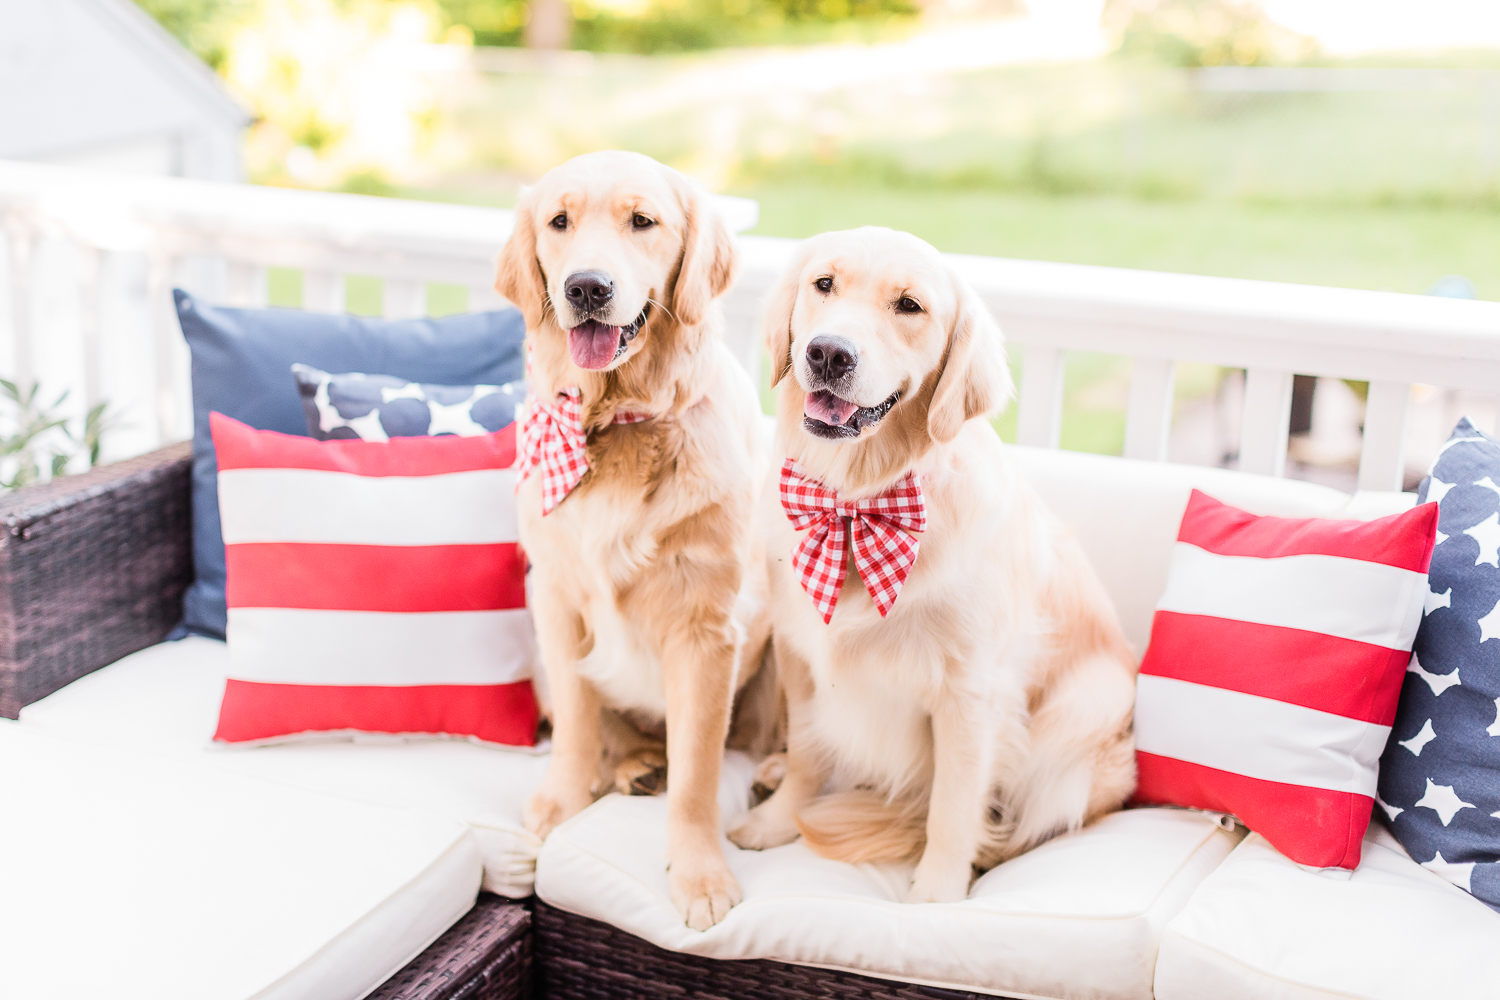 4th of July golden retrievers, 4th of July puppies, red gingham dog bows and collars, Currently Obsessed: Cute Female Dog Bows for Large Breeds by popular southern lifestyle blogger and golden retriever dog mom Stephanie Ziajka from Diary of a Debutante, how to make dog bows stay in, designer dog bows, female dog bows, 4th of July dog bows, cute dog bows for large breeds